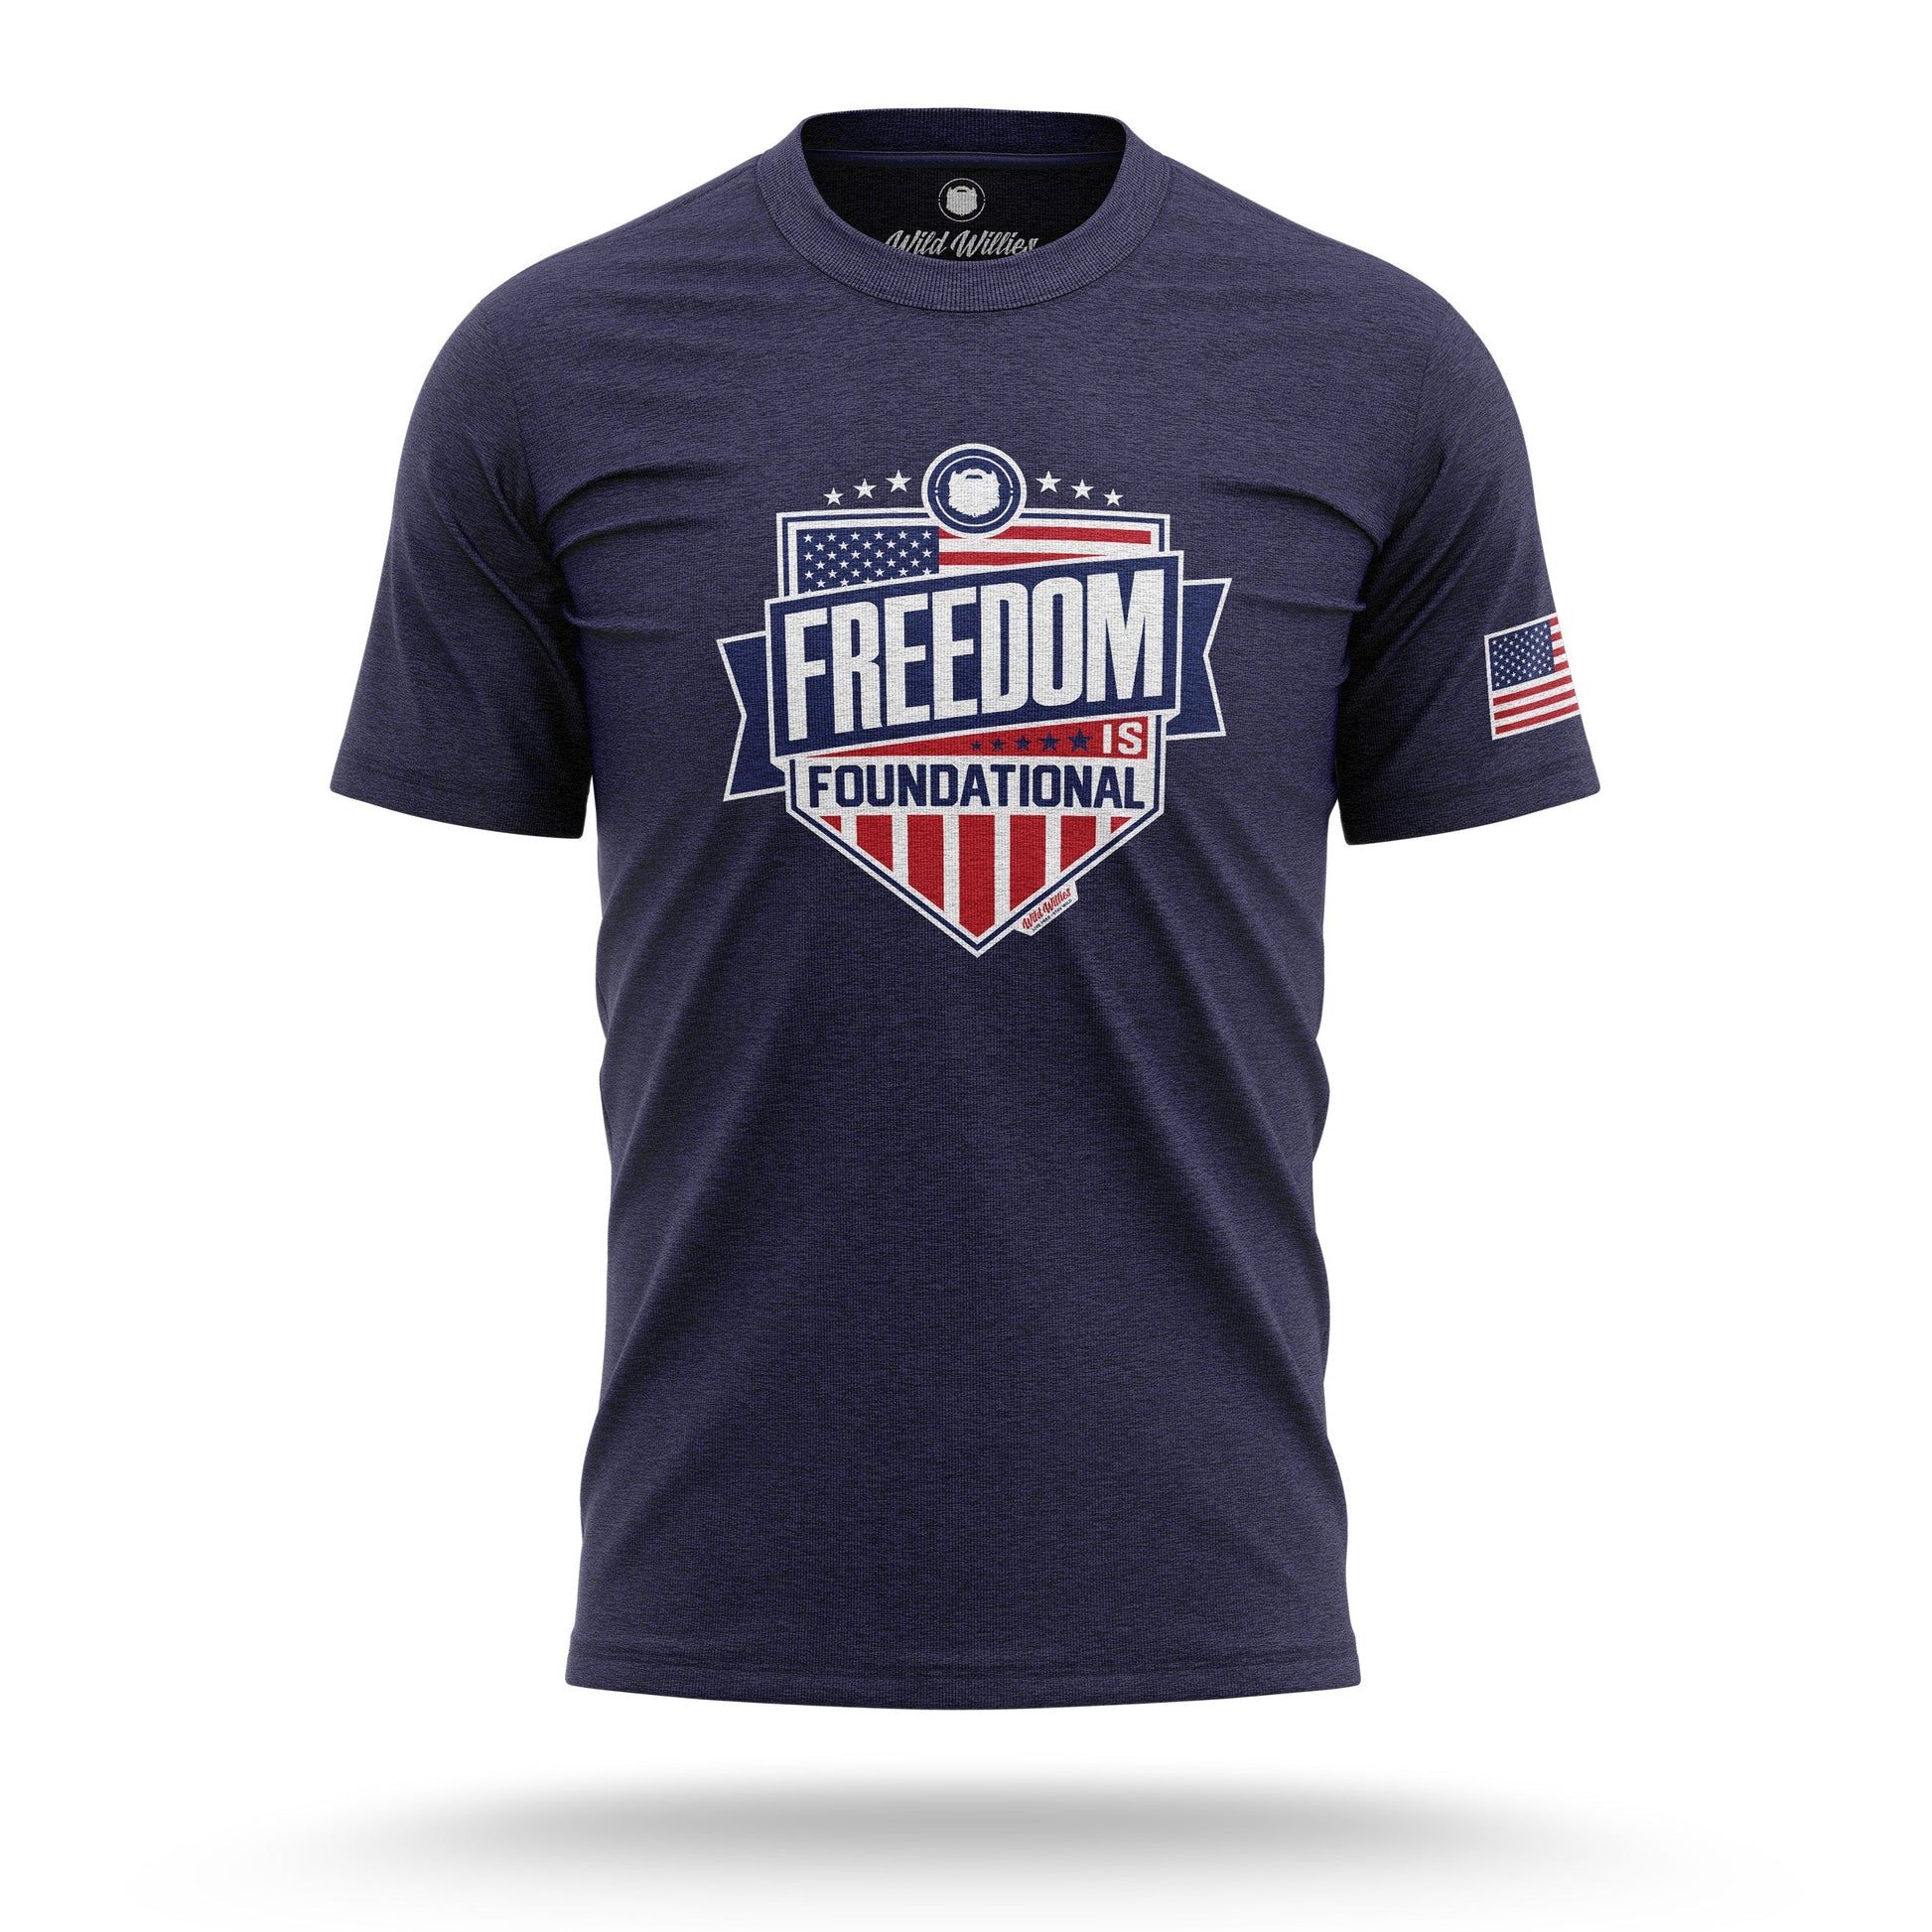 Freedom is Foundational - T-Shirt T-Shirt Wild-Willies S Navy 